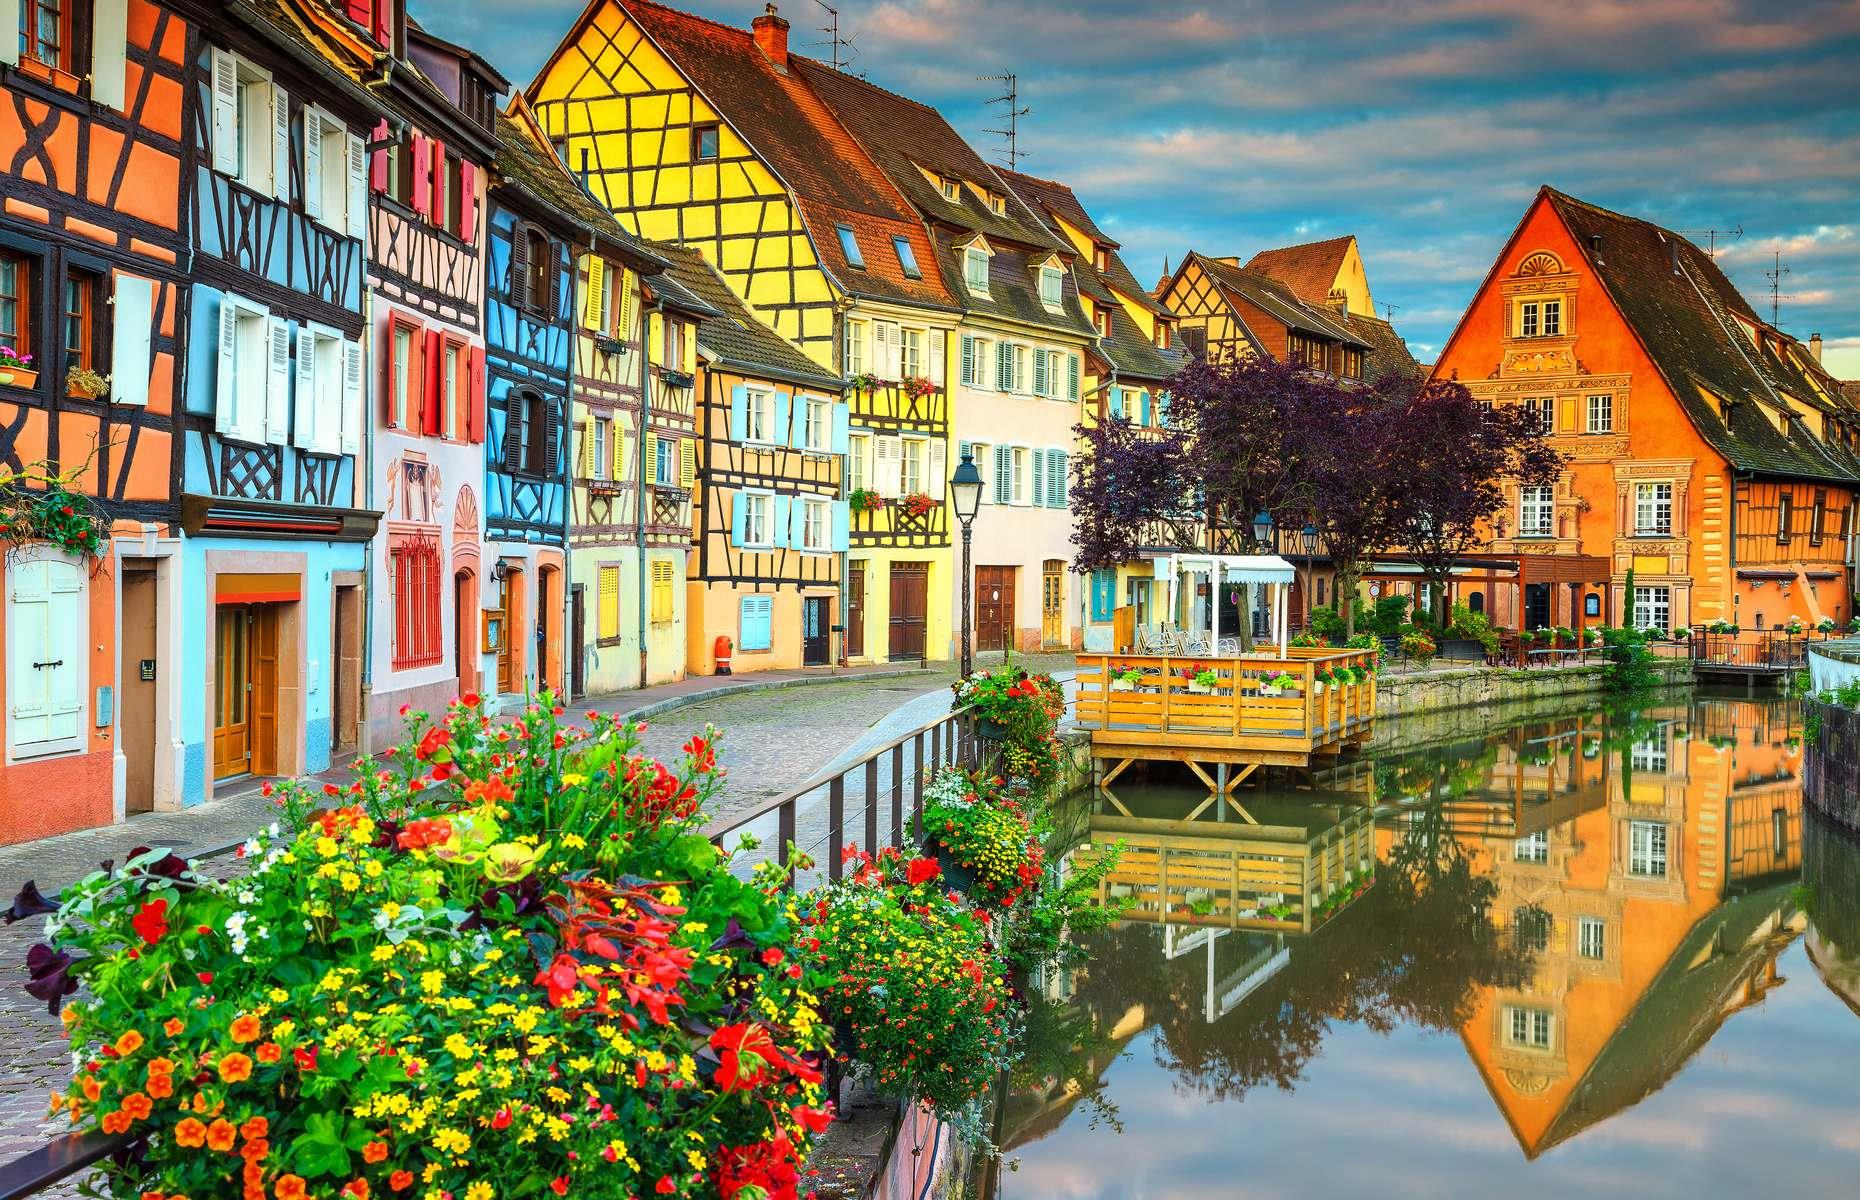 <p>Some argue that Colmar is the most beautiful city in Europe – and they could be right. This picture-perfect place lies in the Alsace region of France, south of Strasbourg, and is first mentioned in records around AD 823. By the 1200s, Colmar had become prosperous due to its location on the wine trade routes, with the rivers Lauch and Thur providing easy access. Colmar’s brightly-coloured half-timbered houses, quaint streets and ornate market squares give the feeling you really have stepped back in time.</p>  <p><strong><a href="https://www.loveexploring.com/galleries/103353/the-worlds-most-beautiful-walled-towns-and-cities?page=1">Now check out the world's most beautiful walled towns and cities</a></strong></p>